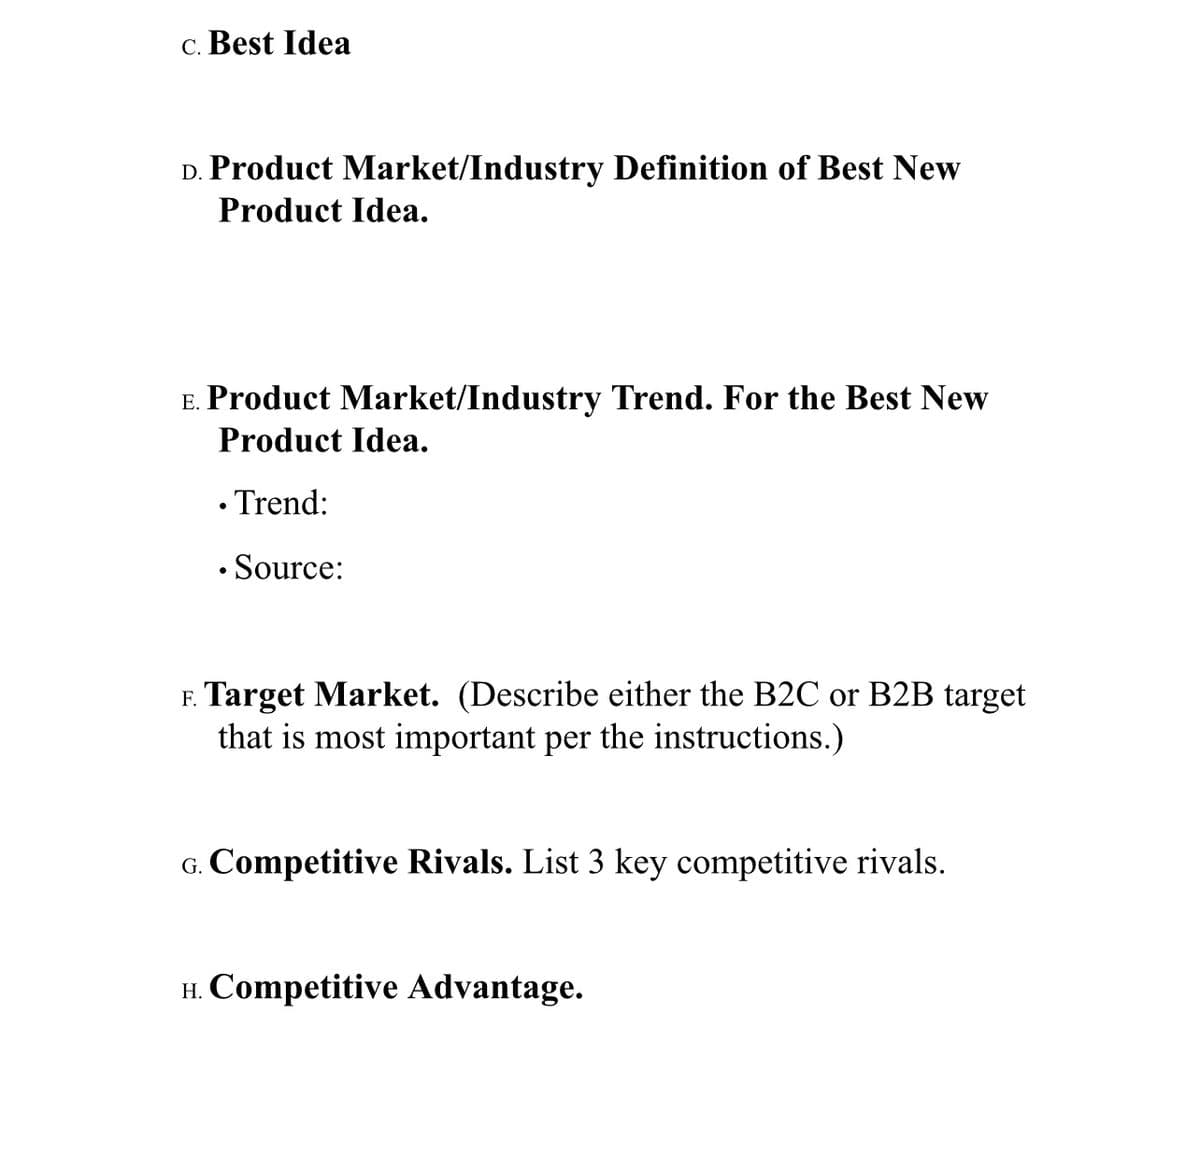 c. Best Idea
D. Product Market/Industry Definition of Best New
Product Idea.
E. Product Market/Industry Trend. For the Best New
Product Idea.
• Trend:
• Source:
F. Target Market. (Describe either the B2C or B2B target
that is most important per the instructions.)
G. Competitive Rivals. List 3 key competitive rivals.
H. Competitive Advantage.